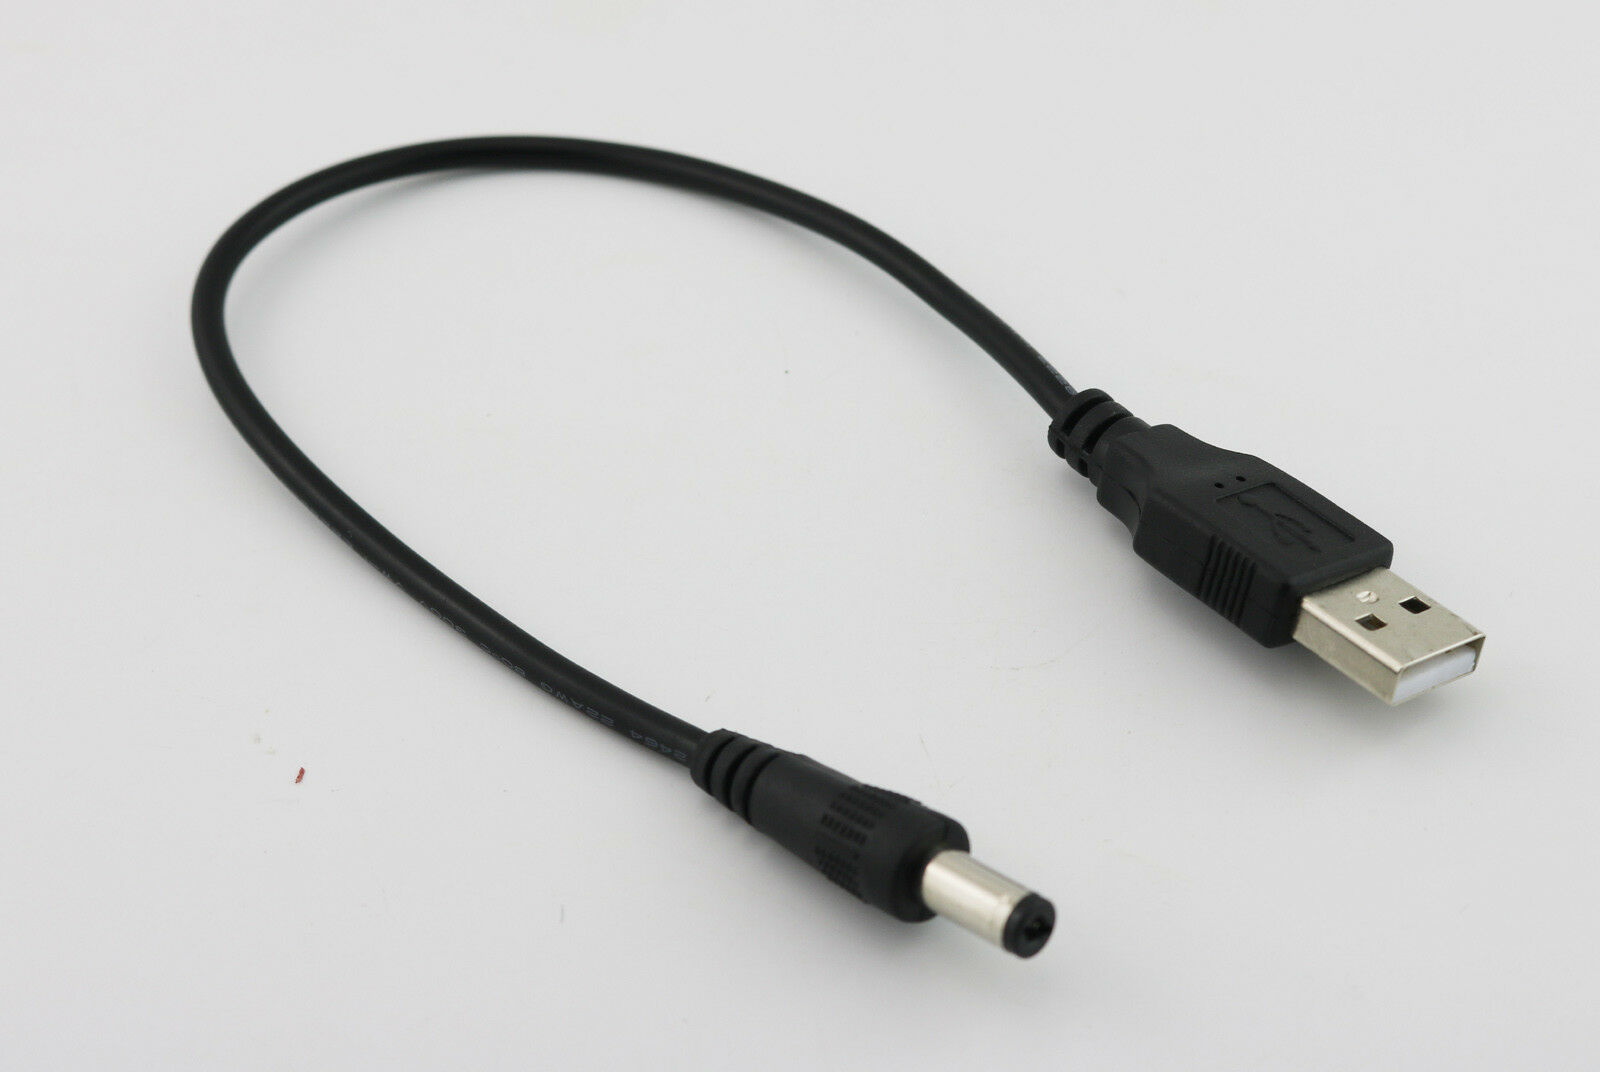 USB Male to 5.5mm x 2.1mm Male 5 Volt DC Power Barrel Jack Power Cable Cord 25cm Type: DC Power Connector To Fit: Ana - Click Image to Close